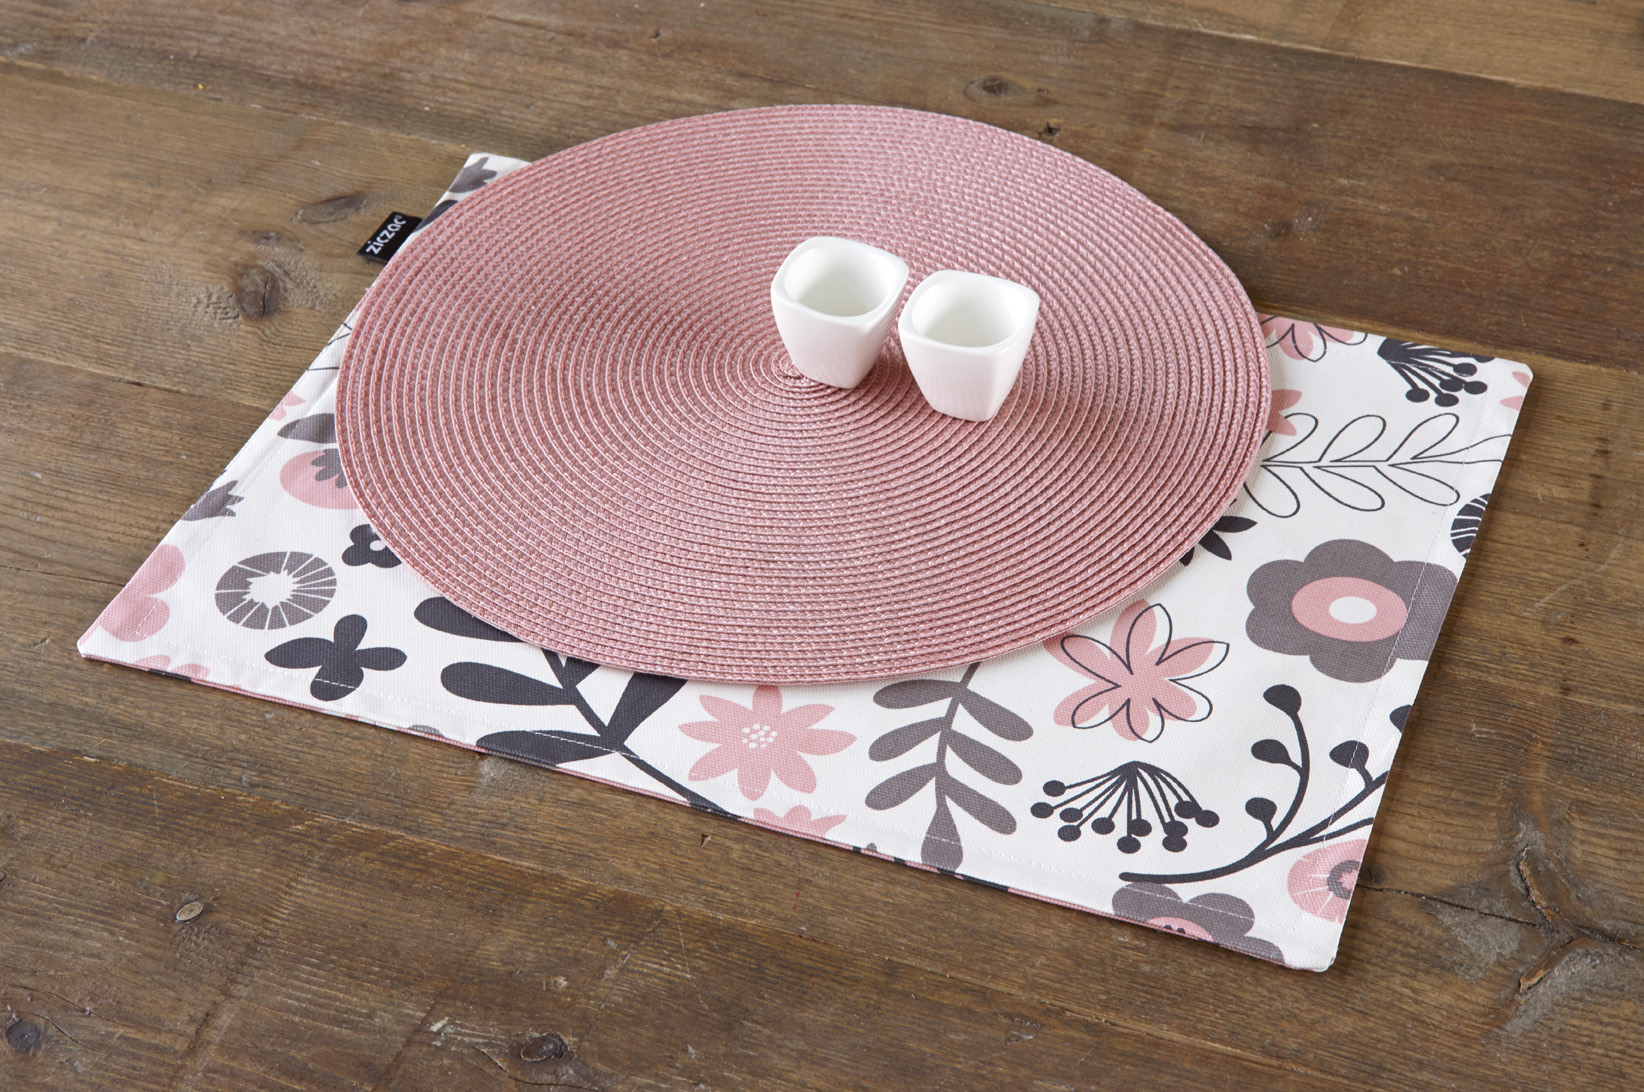 Placemat round, dia 38 cm, pink